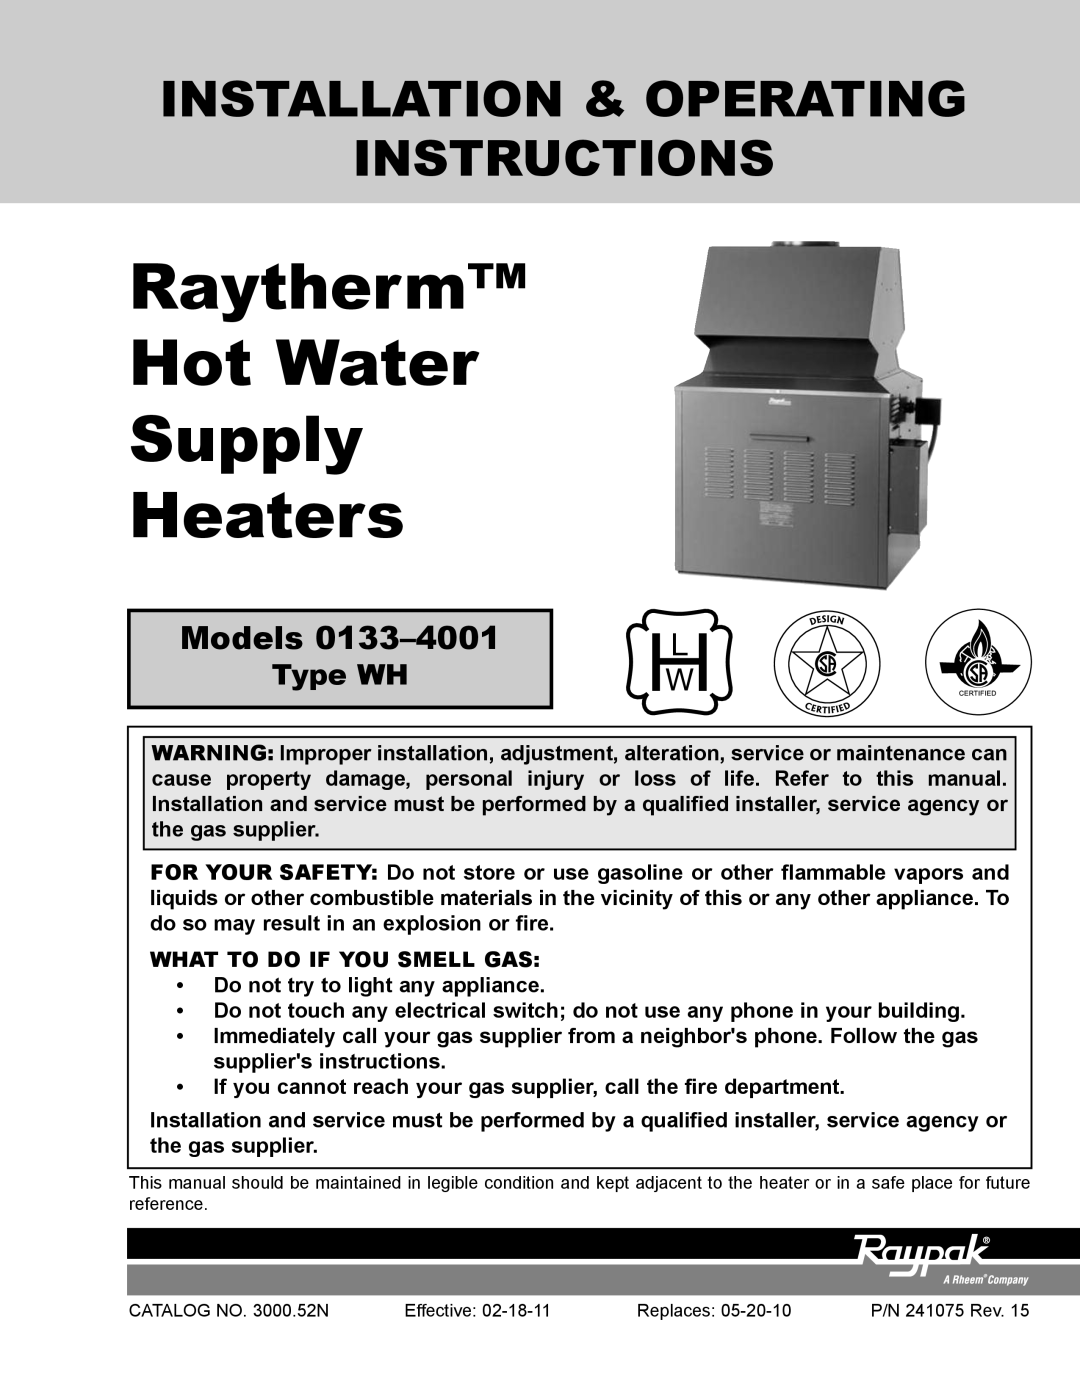 Raypak 1334001 operating instructions Models, What To Do If You Smell Gas, Do not try to light any appliance, Type WH 